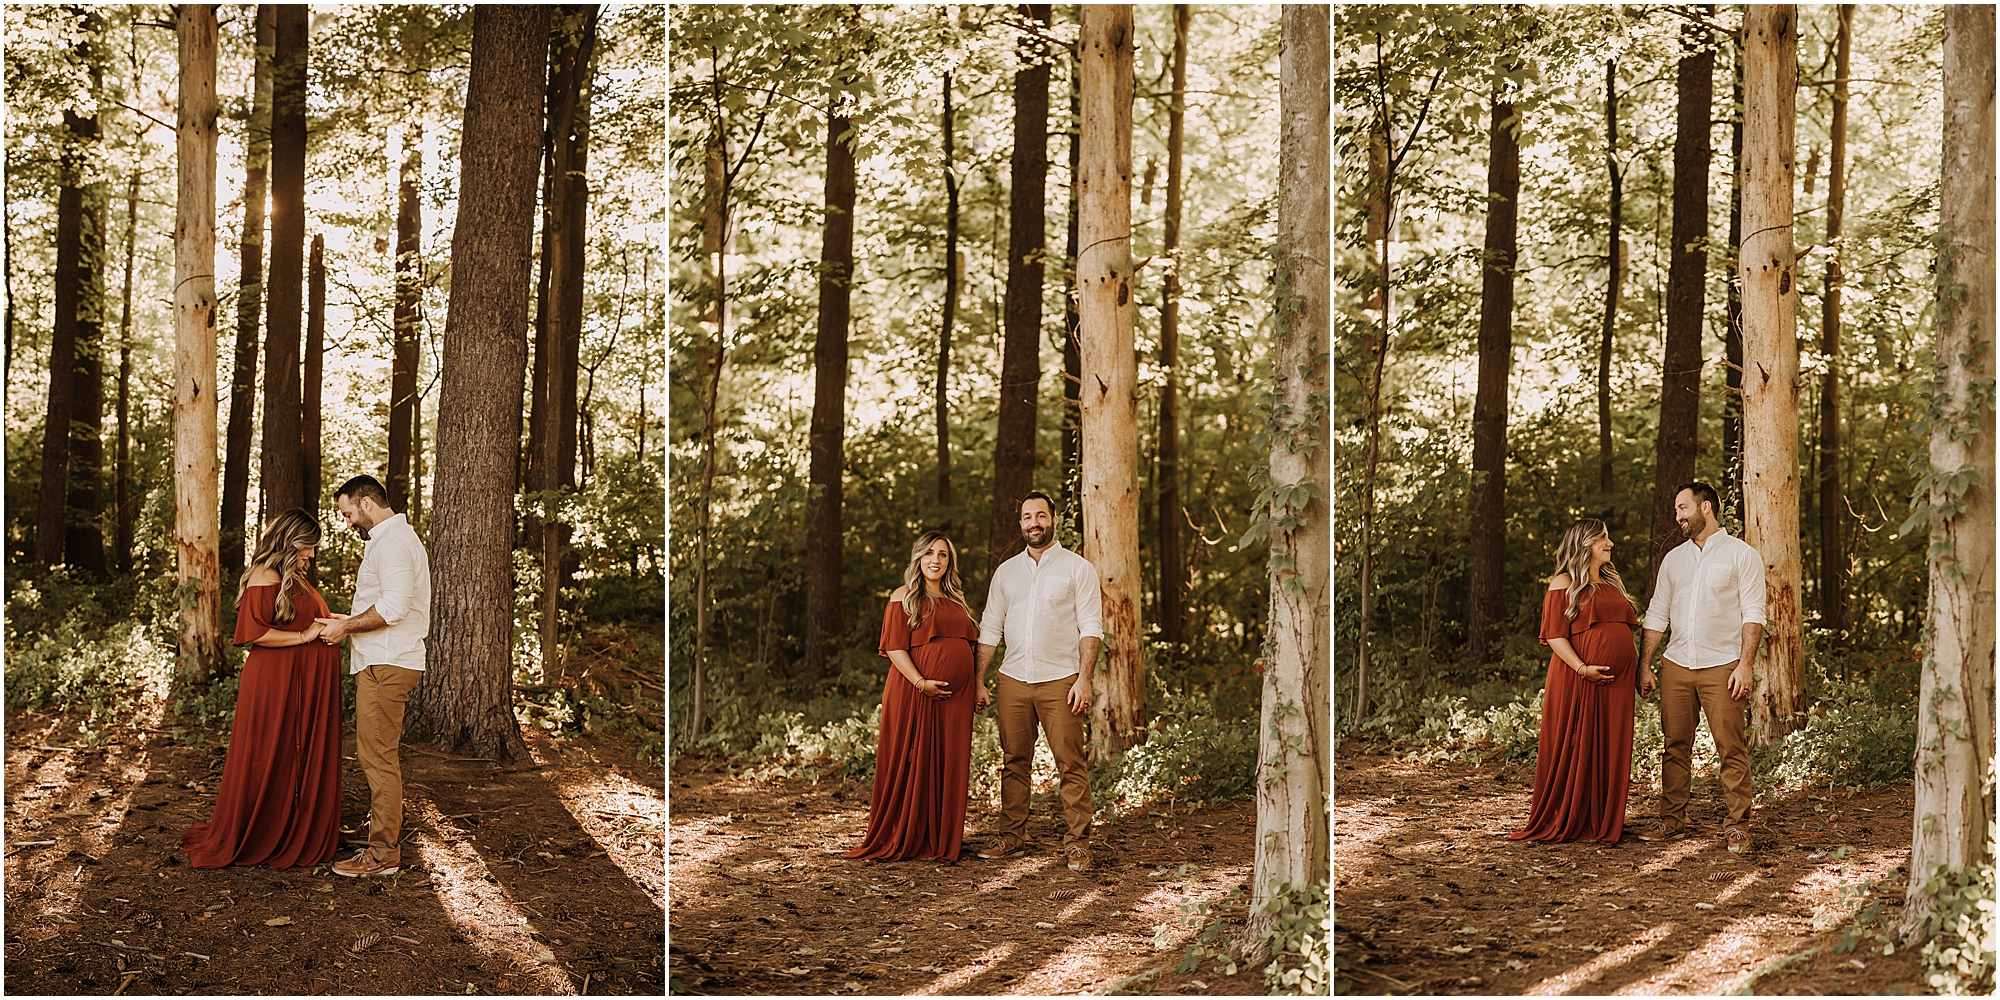 FOREST MATERNITY PICTURES MICHIGAN